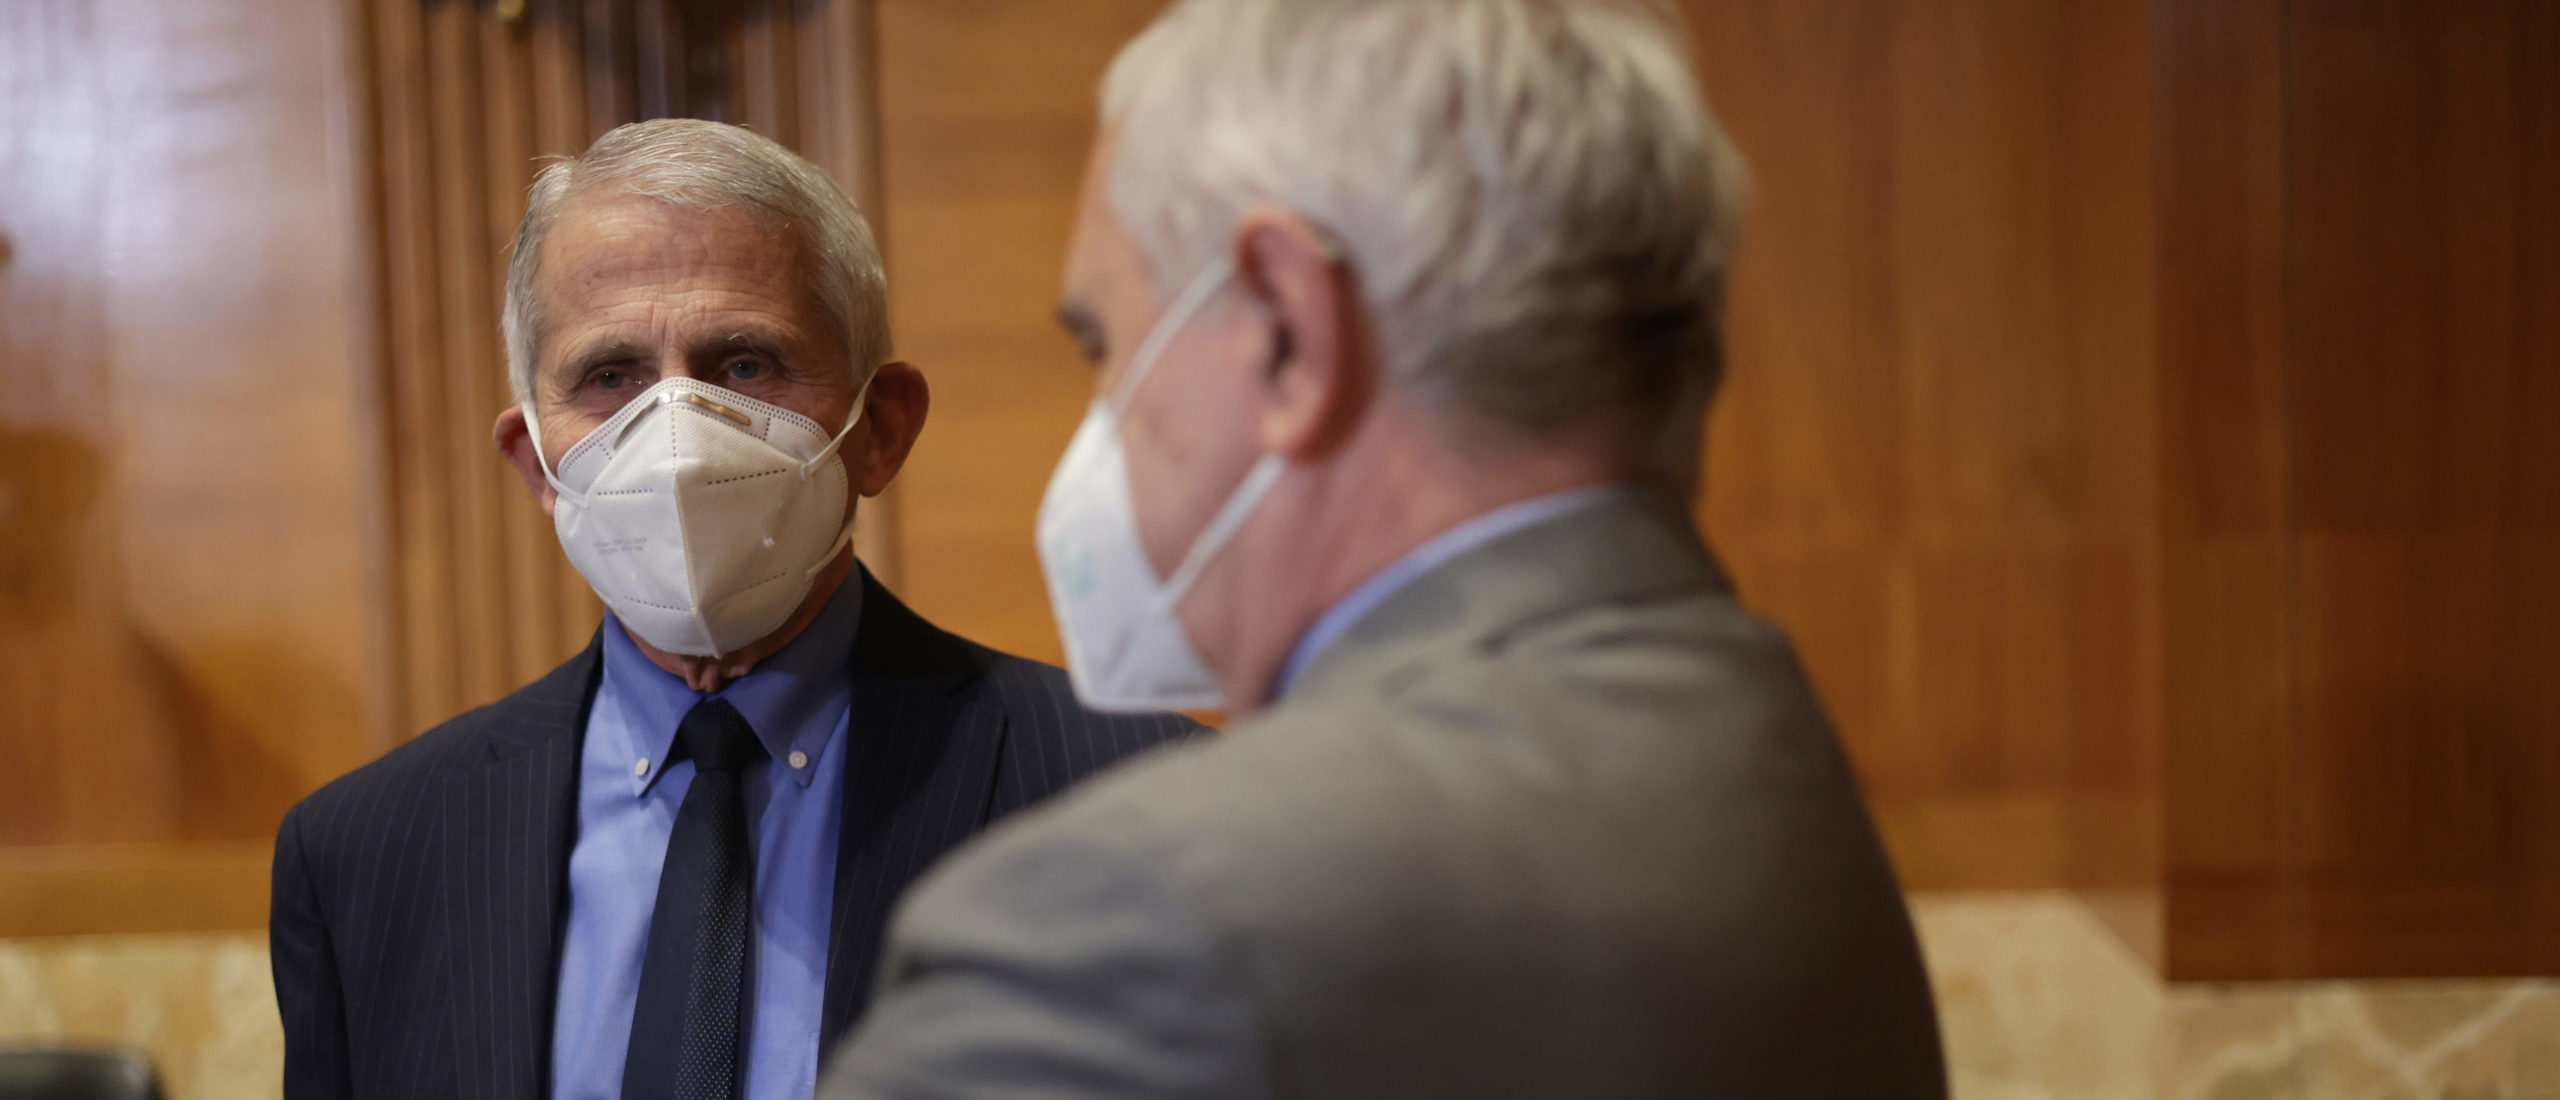 Expert Panel Says Americans Should Have Given Fauci More Power, Not Less, To Stop Pandemic